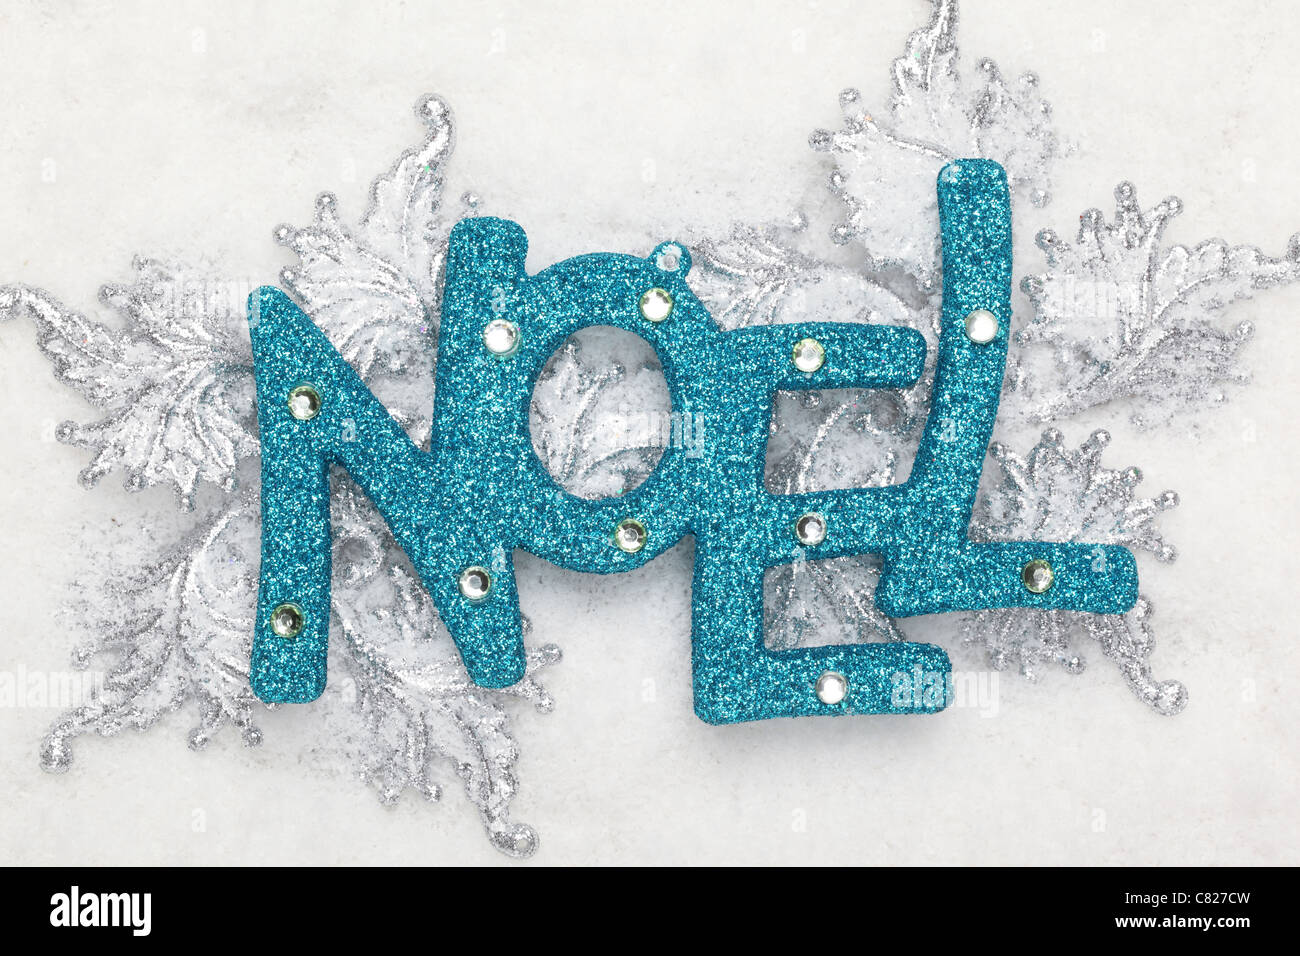 Glitter Christmas ornament on snowflakes Banque D'Images